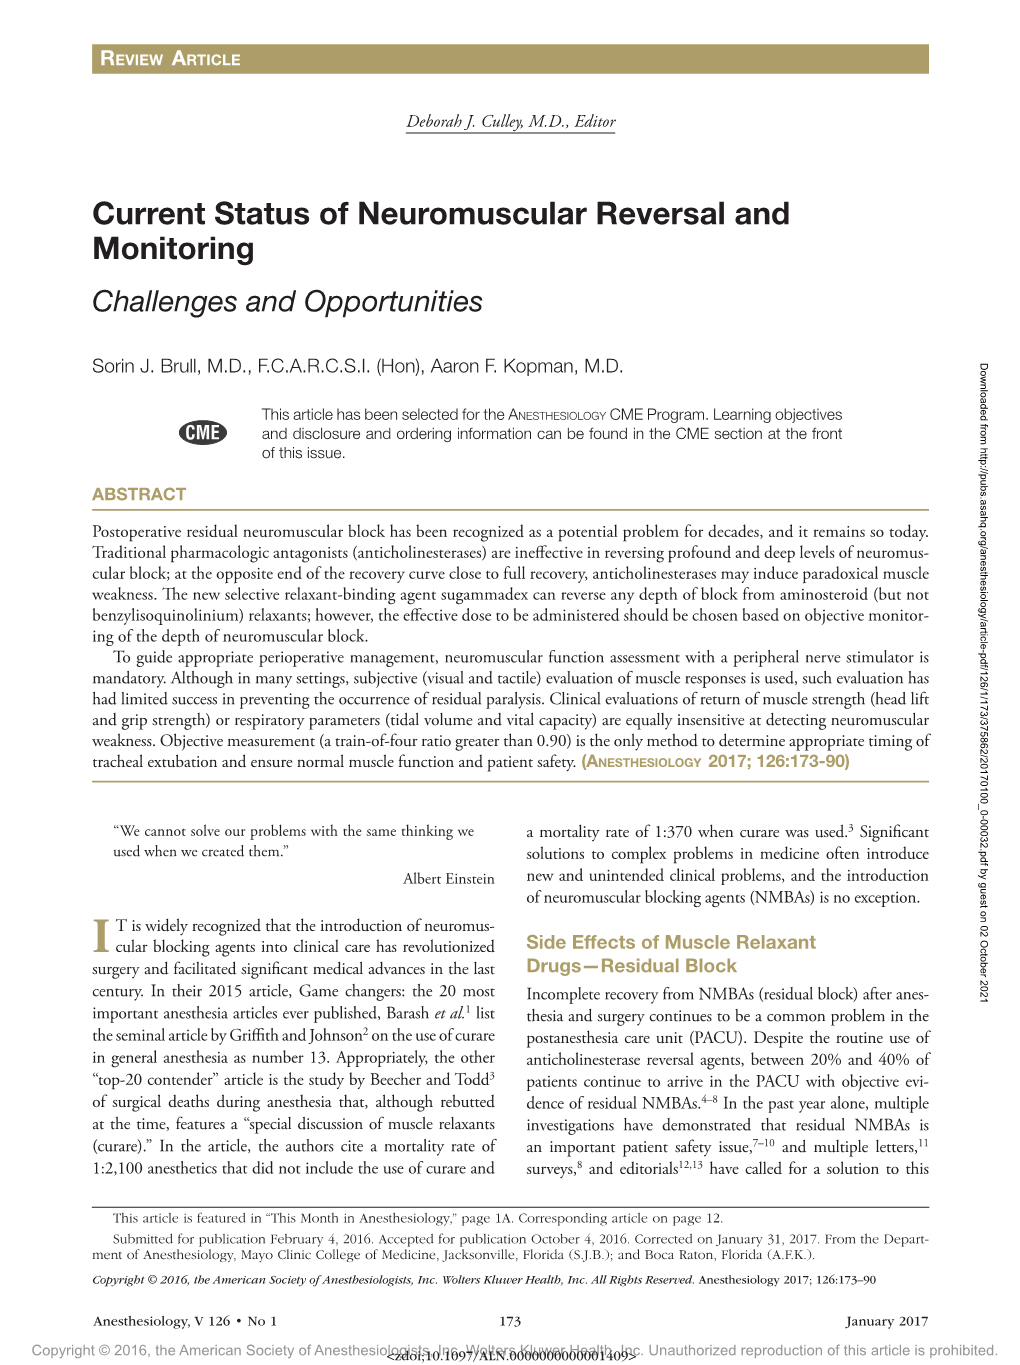 Current Status of Neuromuscular Reversal and Monitoring Challenges and Opportunities